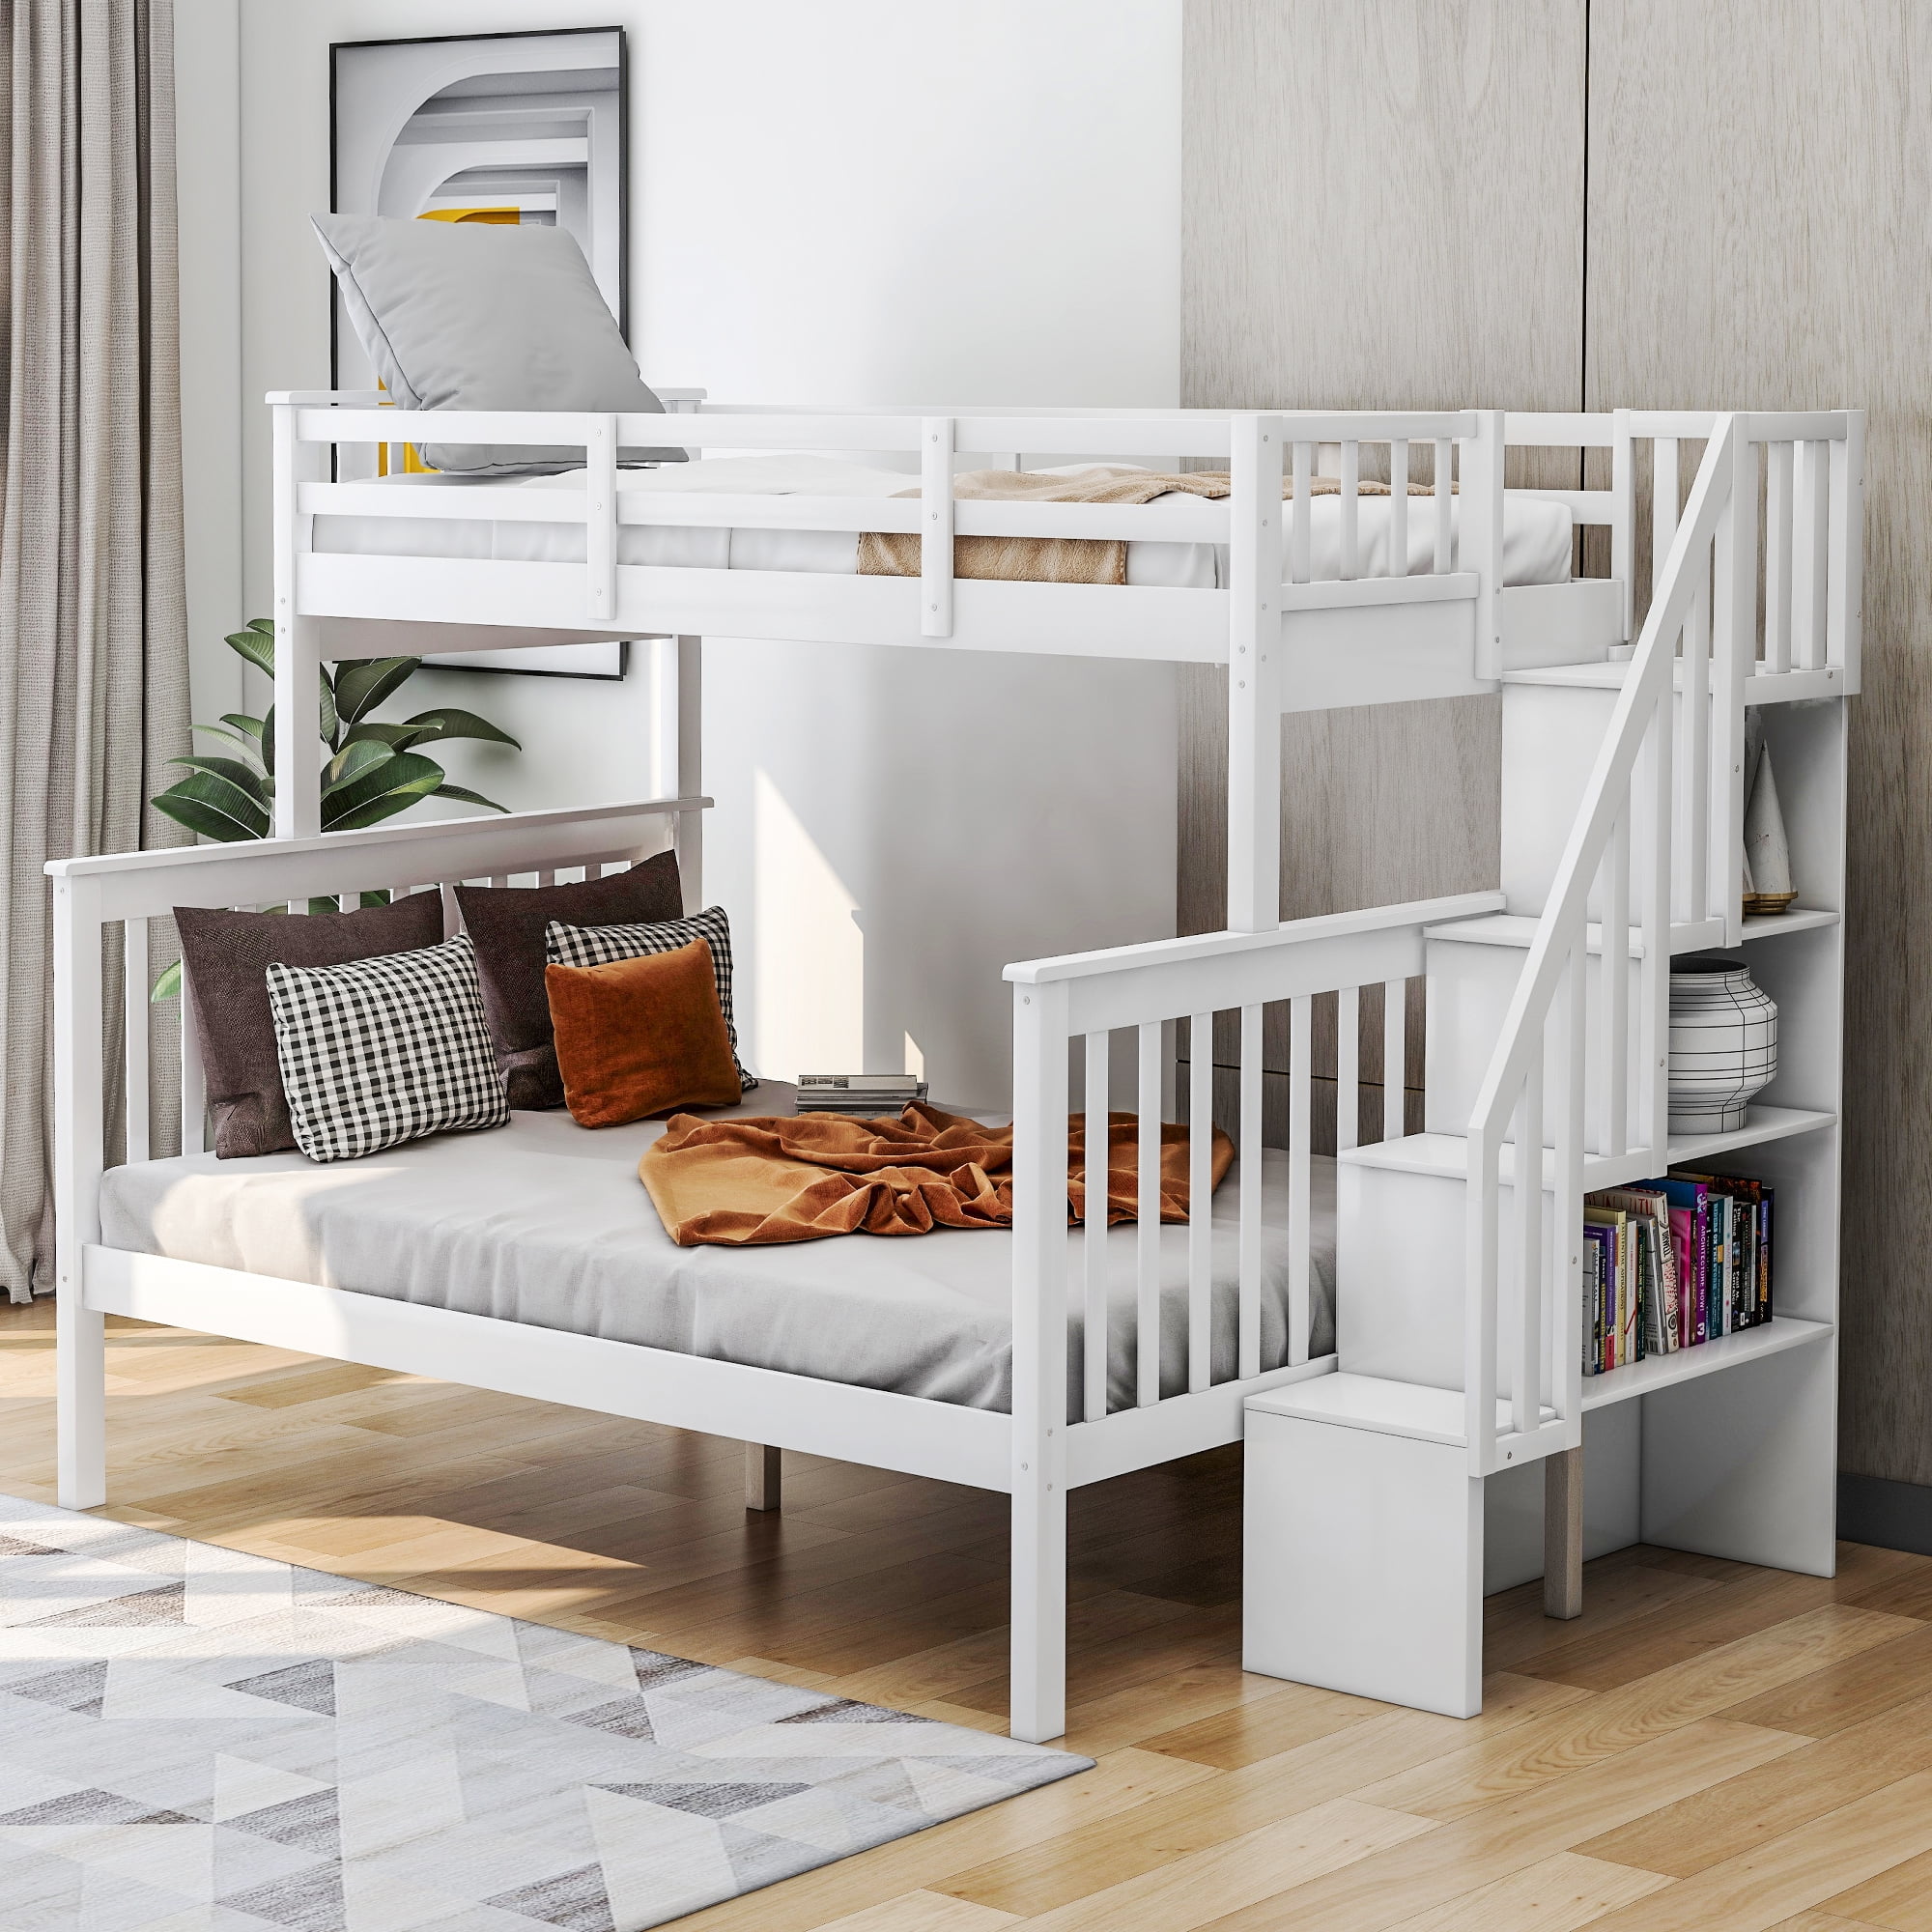 Kids Bunk Beds For Boys Girls Twin, Bunk Beds For Boy Girl Twins